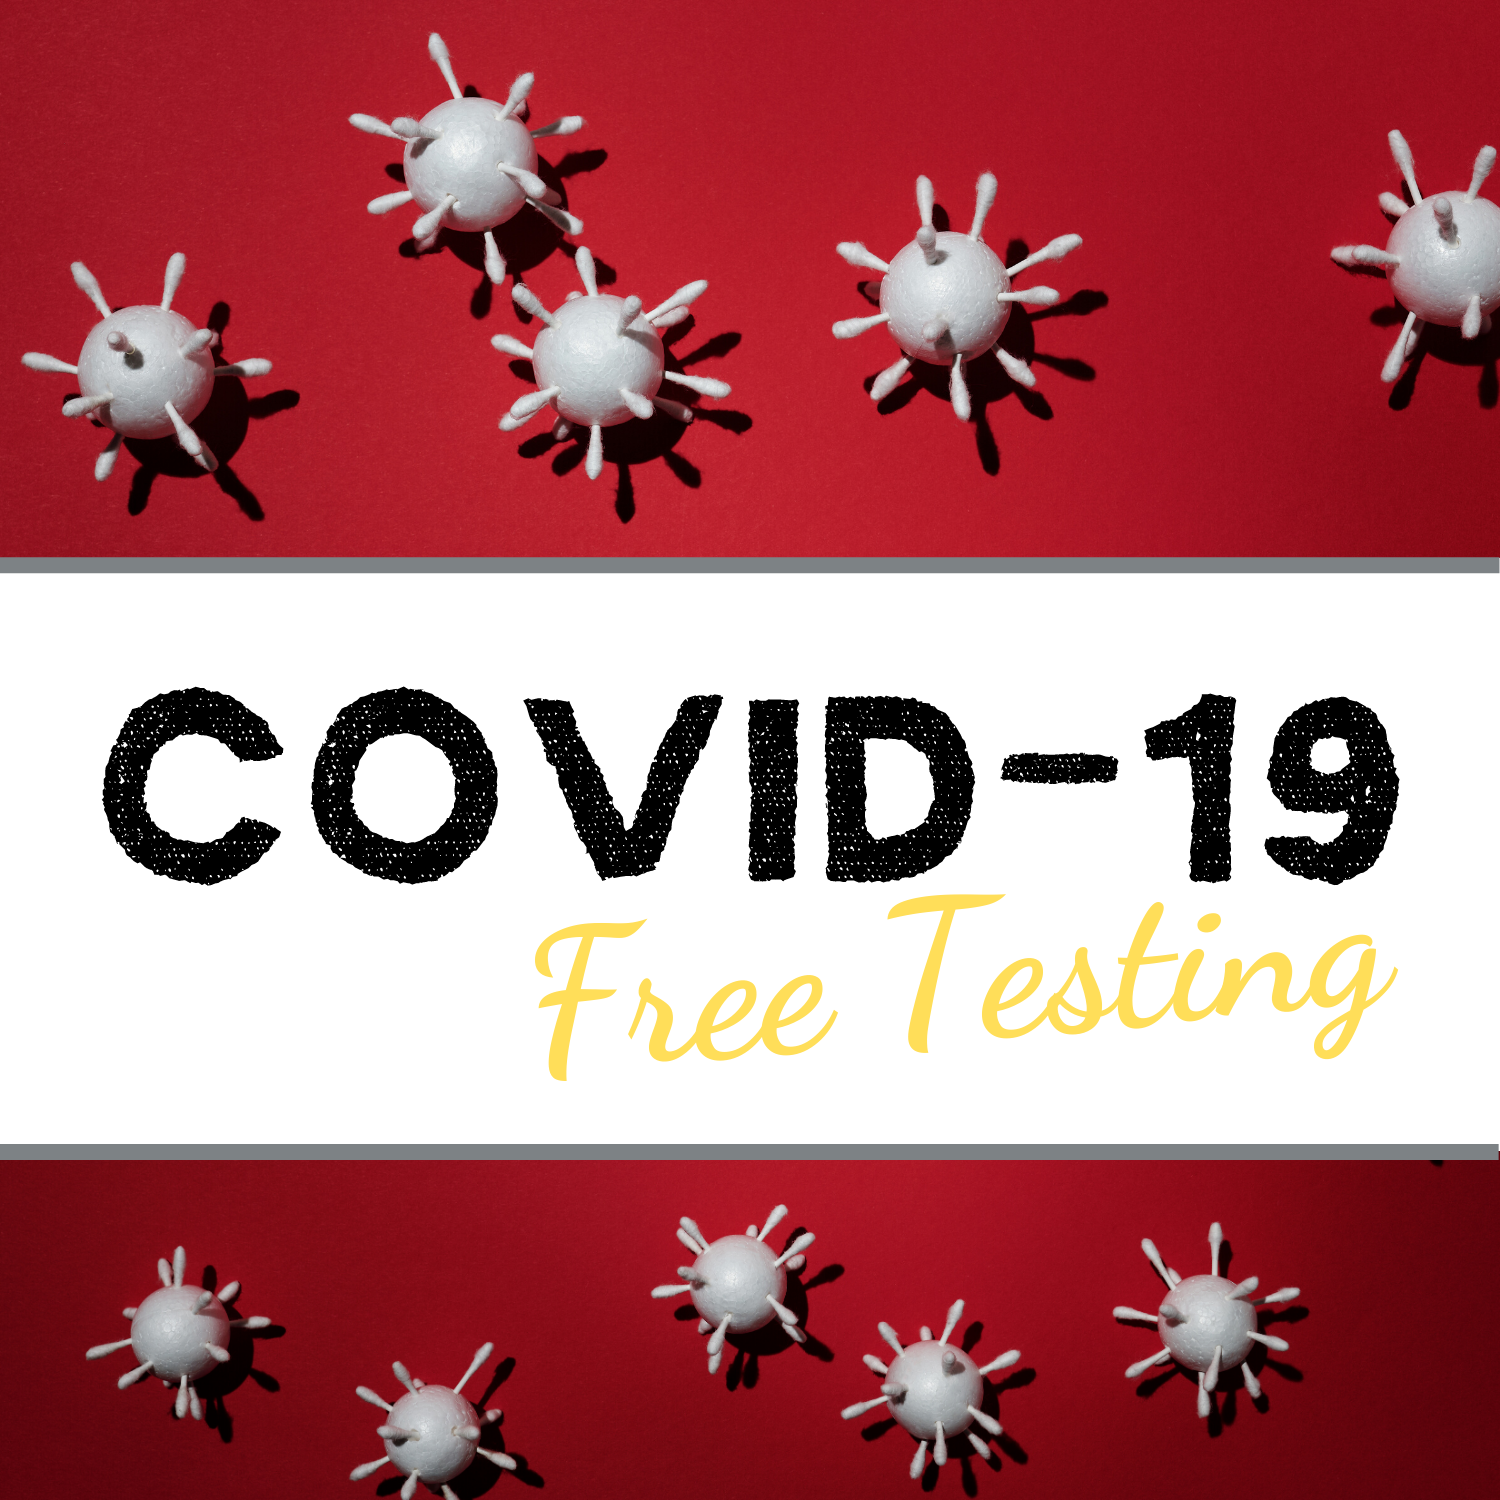 Beaufort Memorial Hospital to Host Free COVID-19 Testing Events July 15 and July 29 in Northern Beaufort County